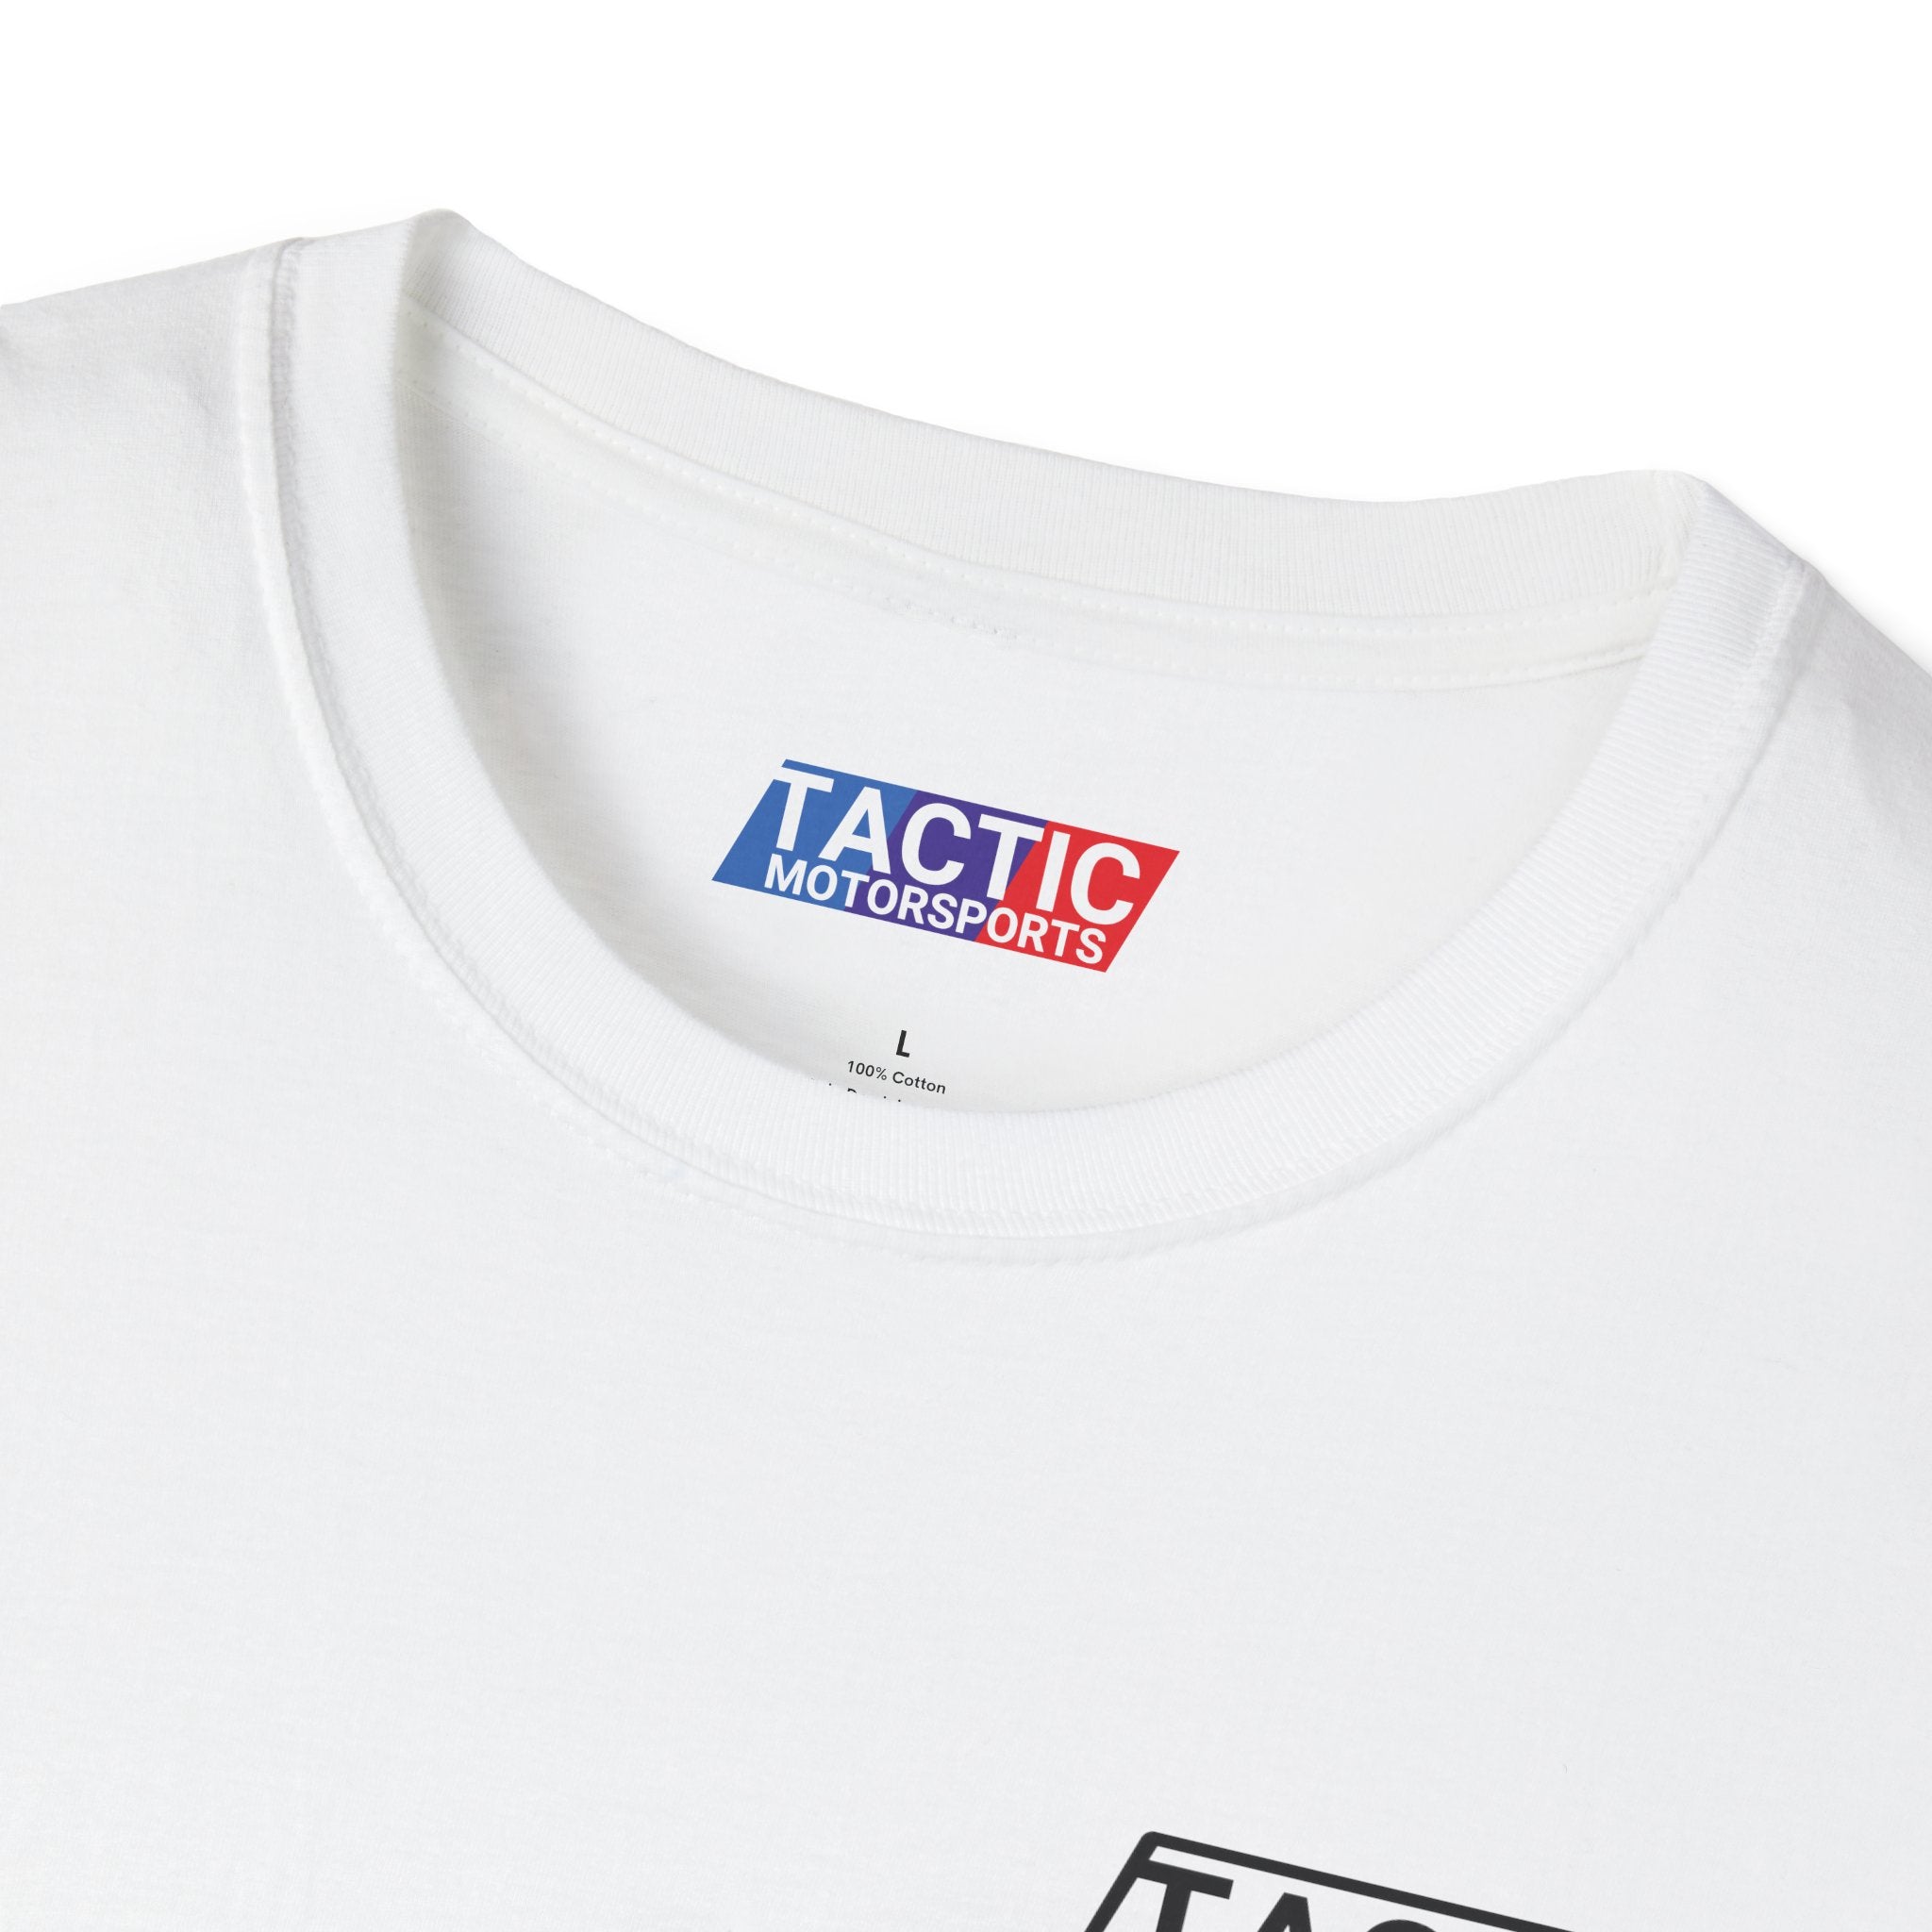 Tactic Motorsports Racing Team White Softstyle T-Shirt